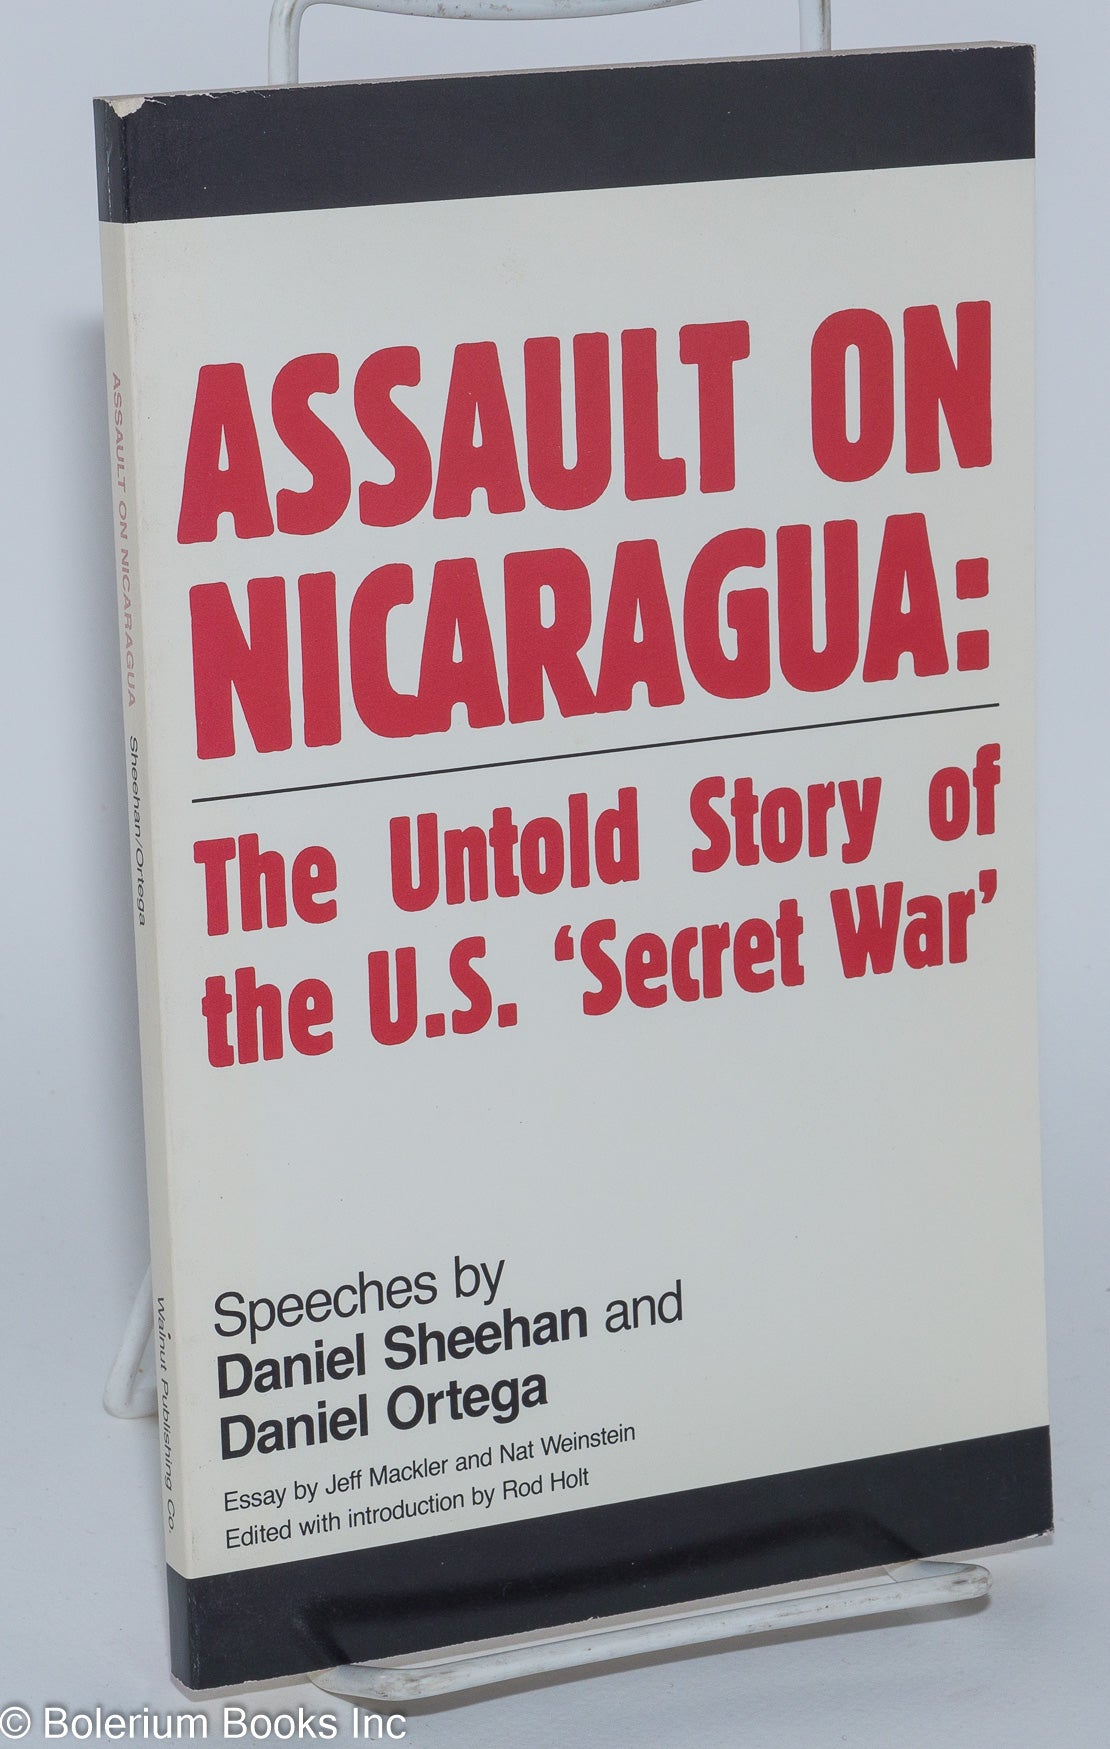 Assault on Nicaragua: the untold story of the U.S. 'secret war.' Speeches  by Daniel Sheehan and Daniel Ortega, essay by Jeff Mackler and Nat  Weinstein, edited with an introduction by Rod Holt